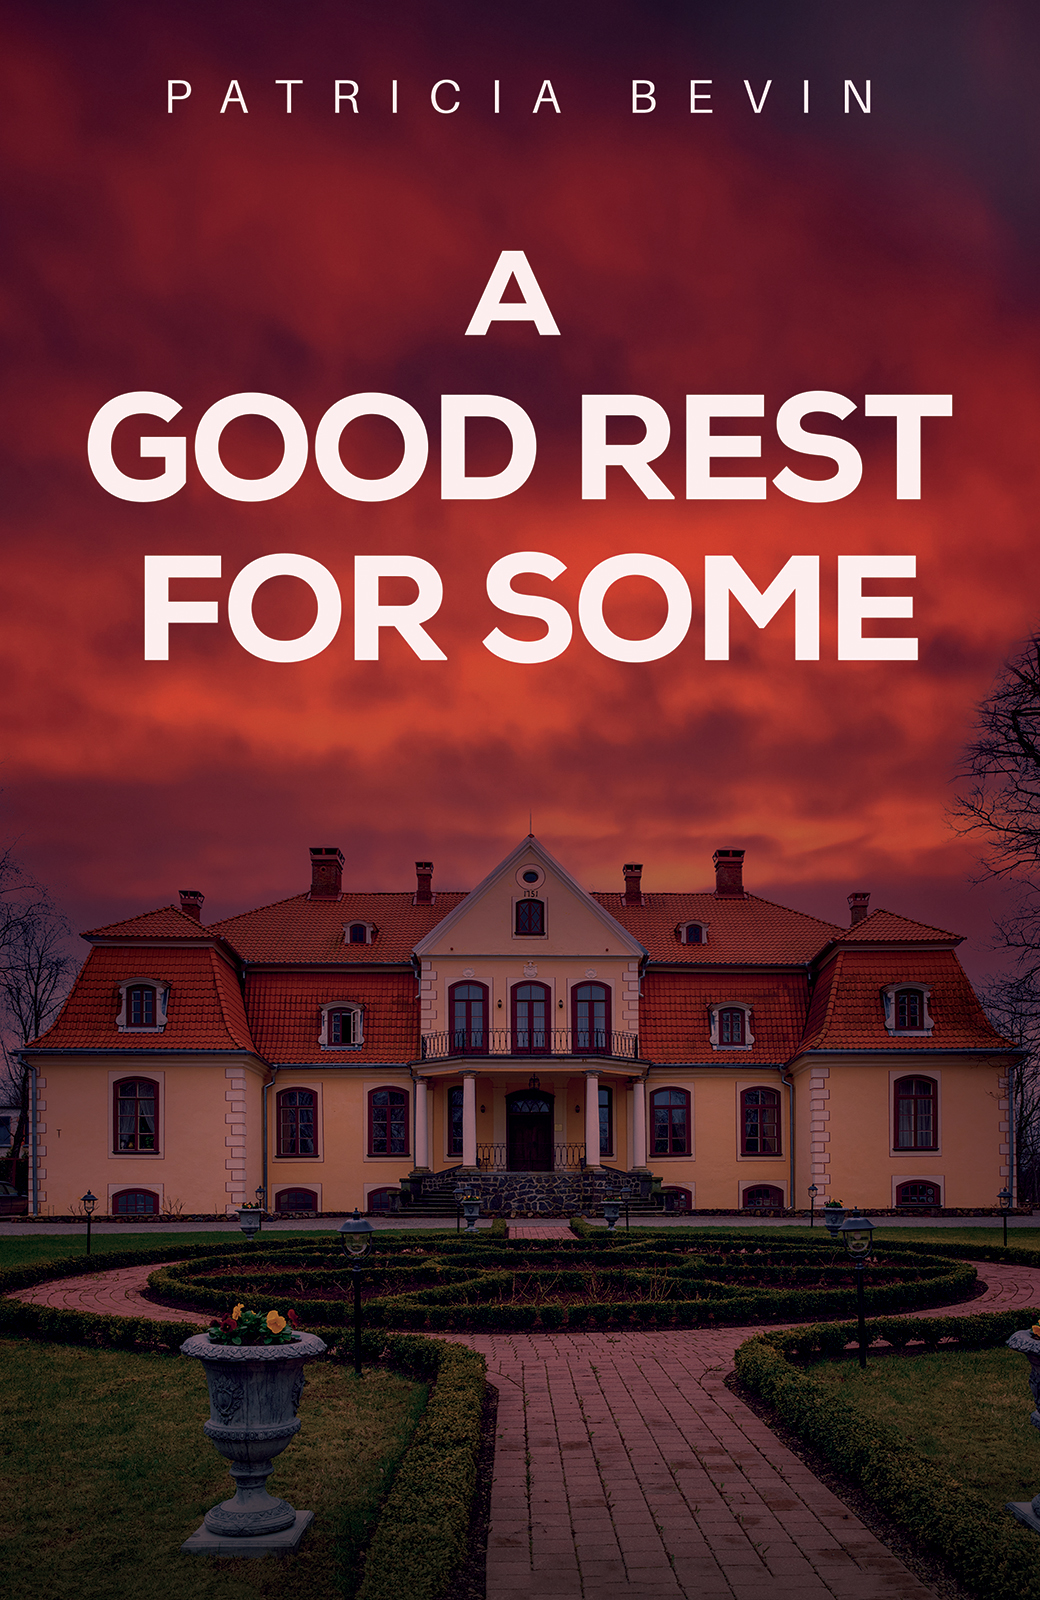 This image is the cover for the book A Good Rest for Some